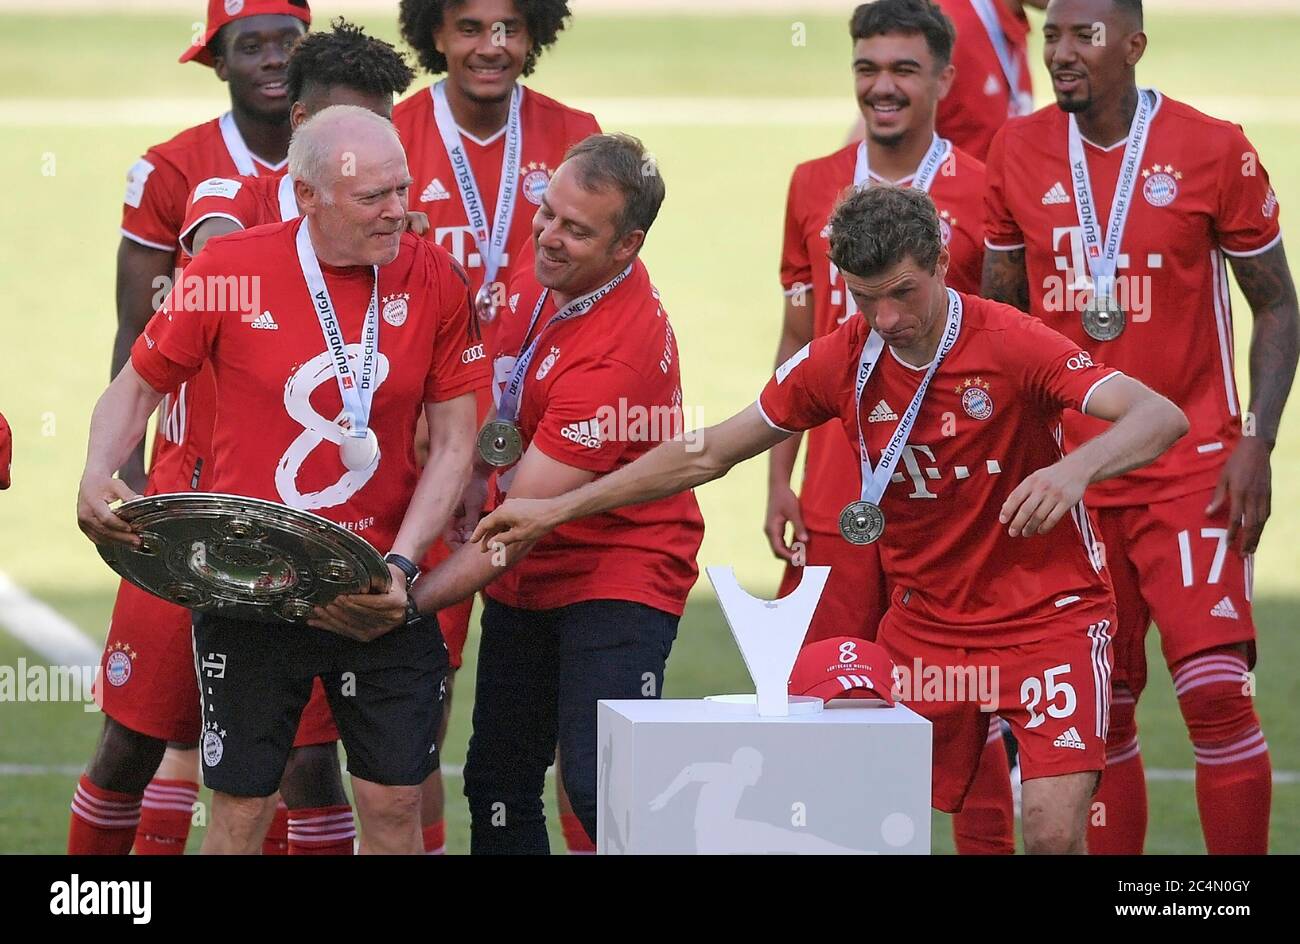 Wolfsburg, Germany, 27 th June 2020,  Winners ceremony after the match: Its the 30 th championship title for FCB.   Trainer Hansi FLICK (FCB), team manager, headcoach, coach,  FCB Co-Trainer Hermann GERLAND, fight for the trophy, Thomas MUELLER, MÜLLER, FCB 25  at the 1.Bundesliga match  VFL WOLFSBURG - FC BAYERN MUENCHEN 0-4 in season 2019/2020 am matchday 34. FCB Foto: © Peter Schatz / Alamy Live News / Bernd Feil/MIS/Pool   - DFL REGULATIONS PROHIBIT ANY USE OF PHOTOGRAPHS as IMAGE SEQUENCES and/or QUASI-VIDEO -   National and international News-Agencies OUT  Editorial Use ONLY Stock Photo